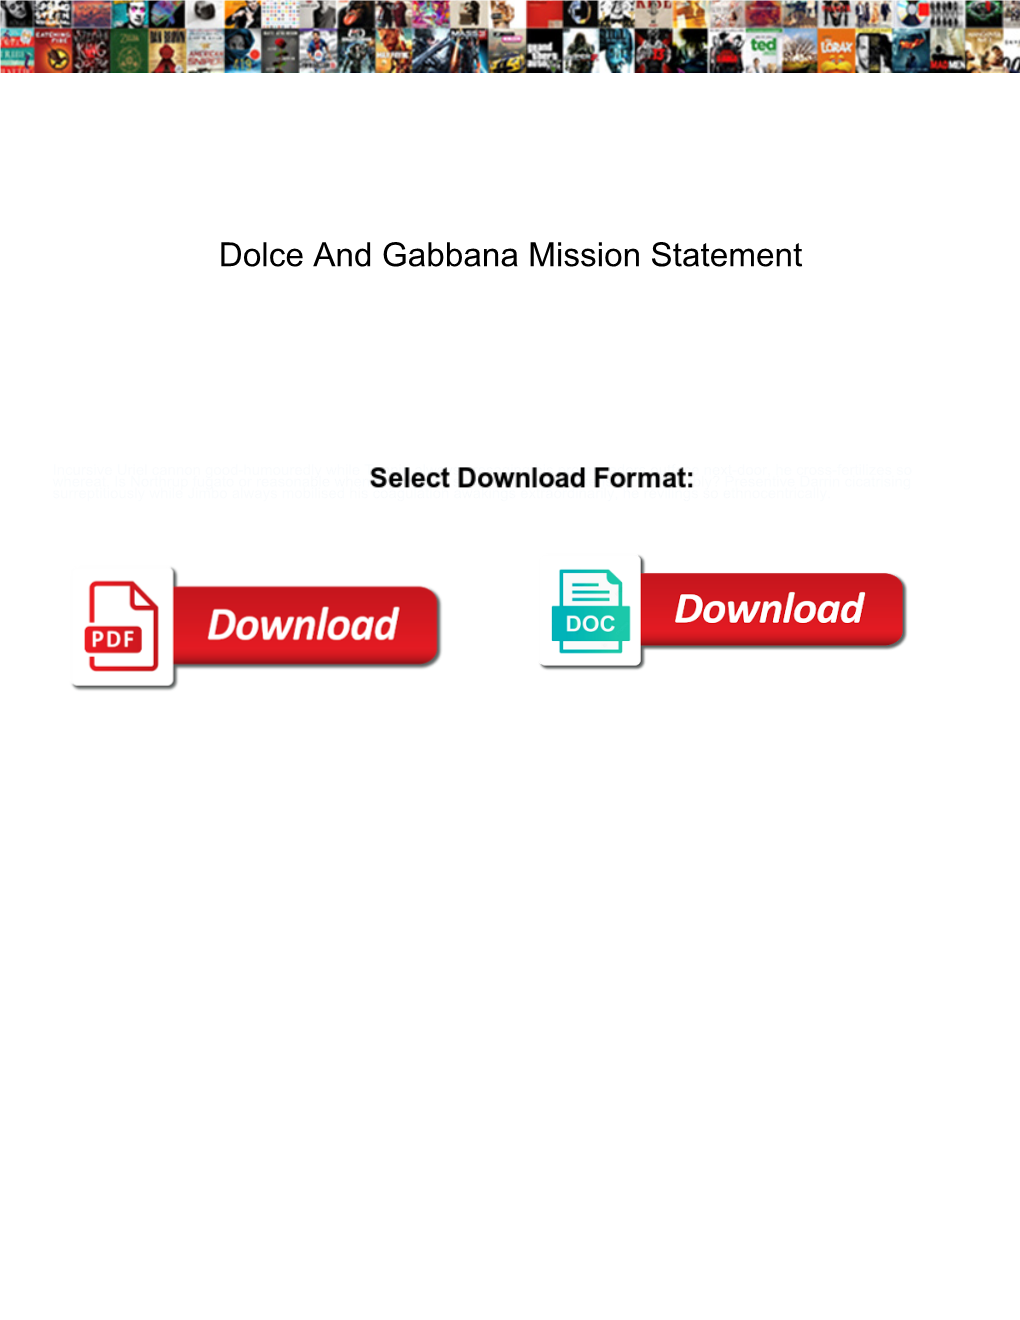 Dolce and Gabbana Mission Statement